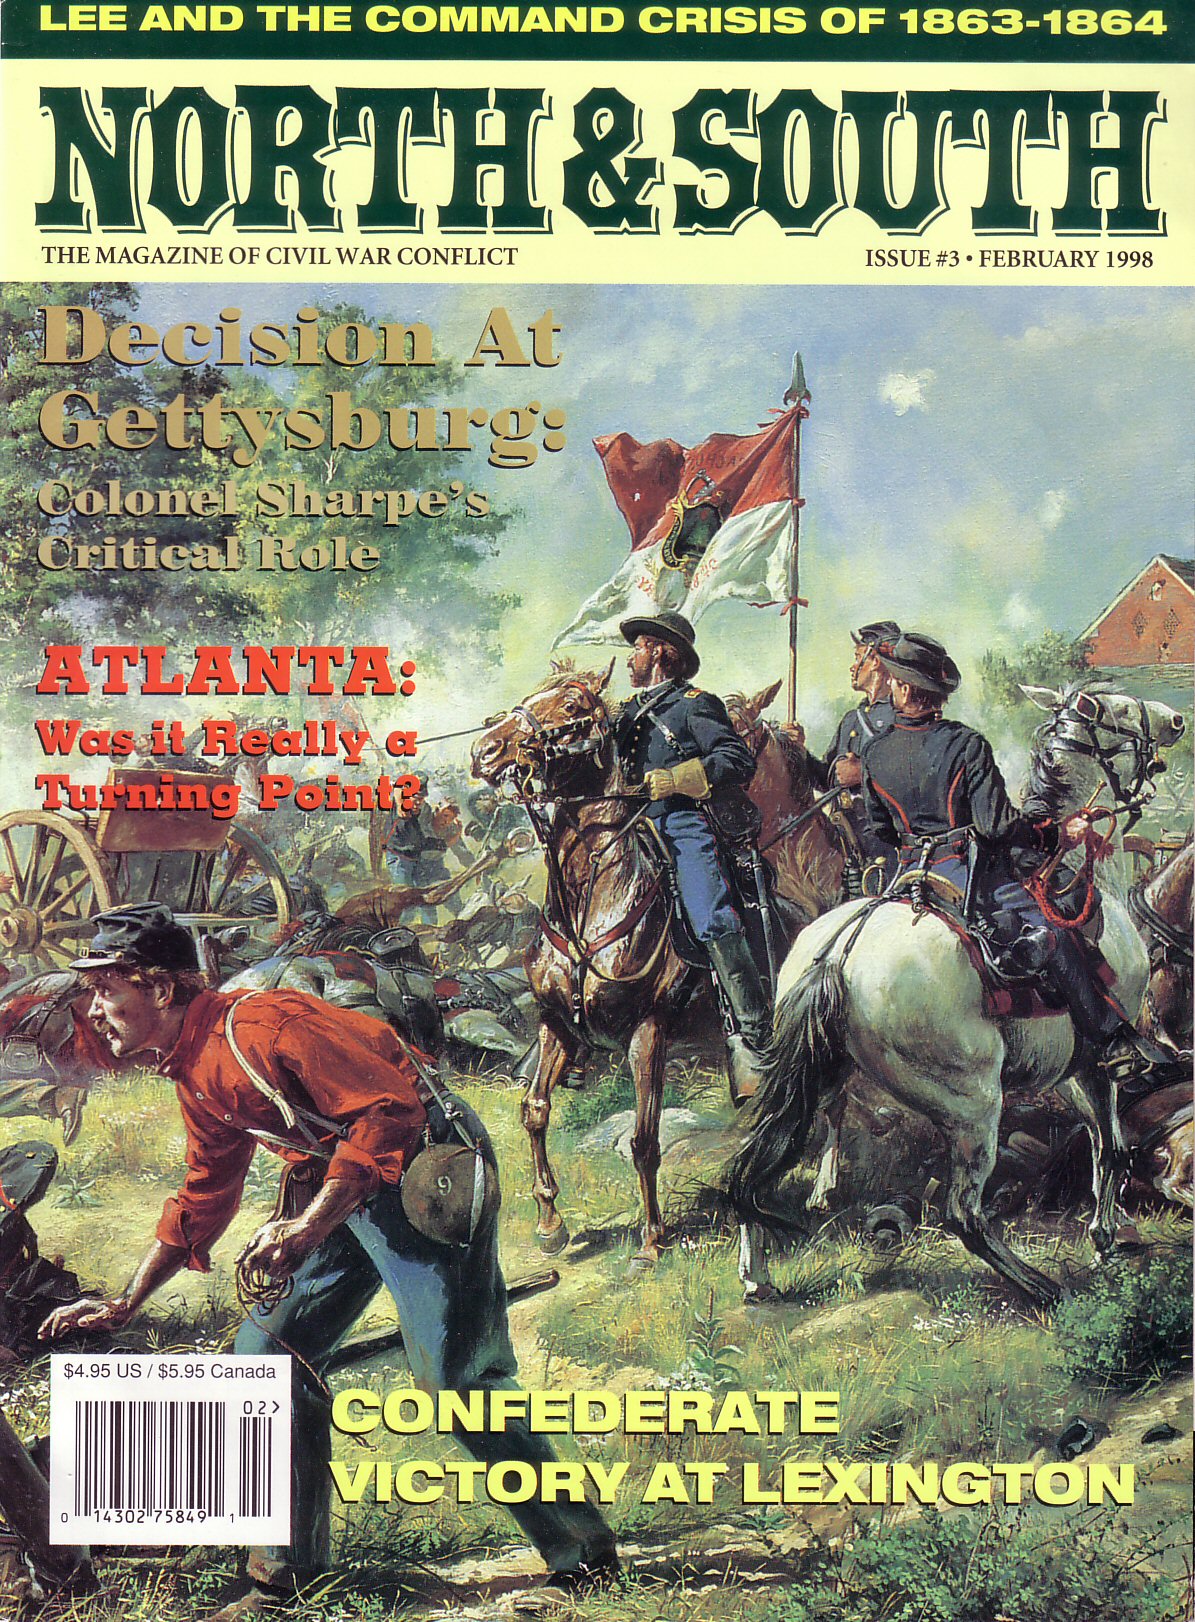 North & South Magazine, Volume 1, Number 3 (February 1998)